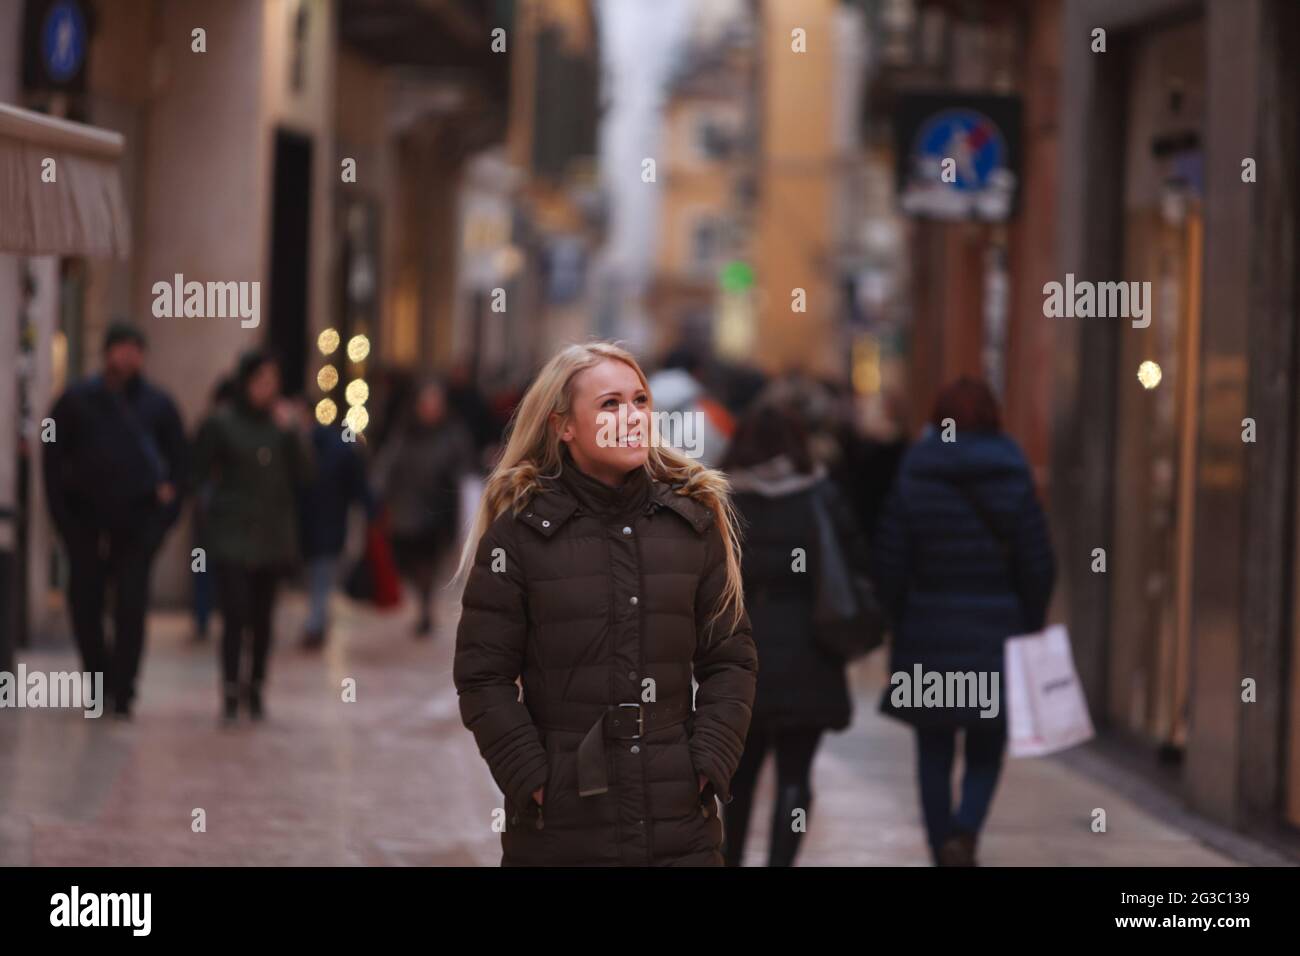 Happy natural young woman strolling down a busy urban pedestrian street in a warm winter coat looking up to the side with a smile with lateral copyspa Stock Photo